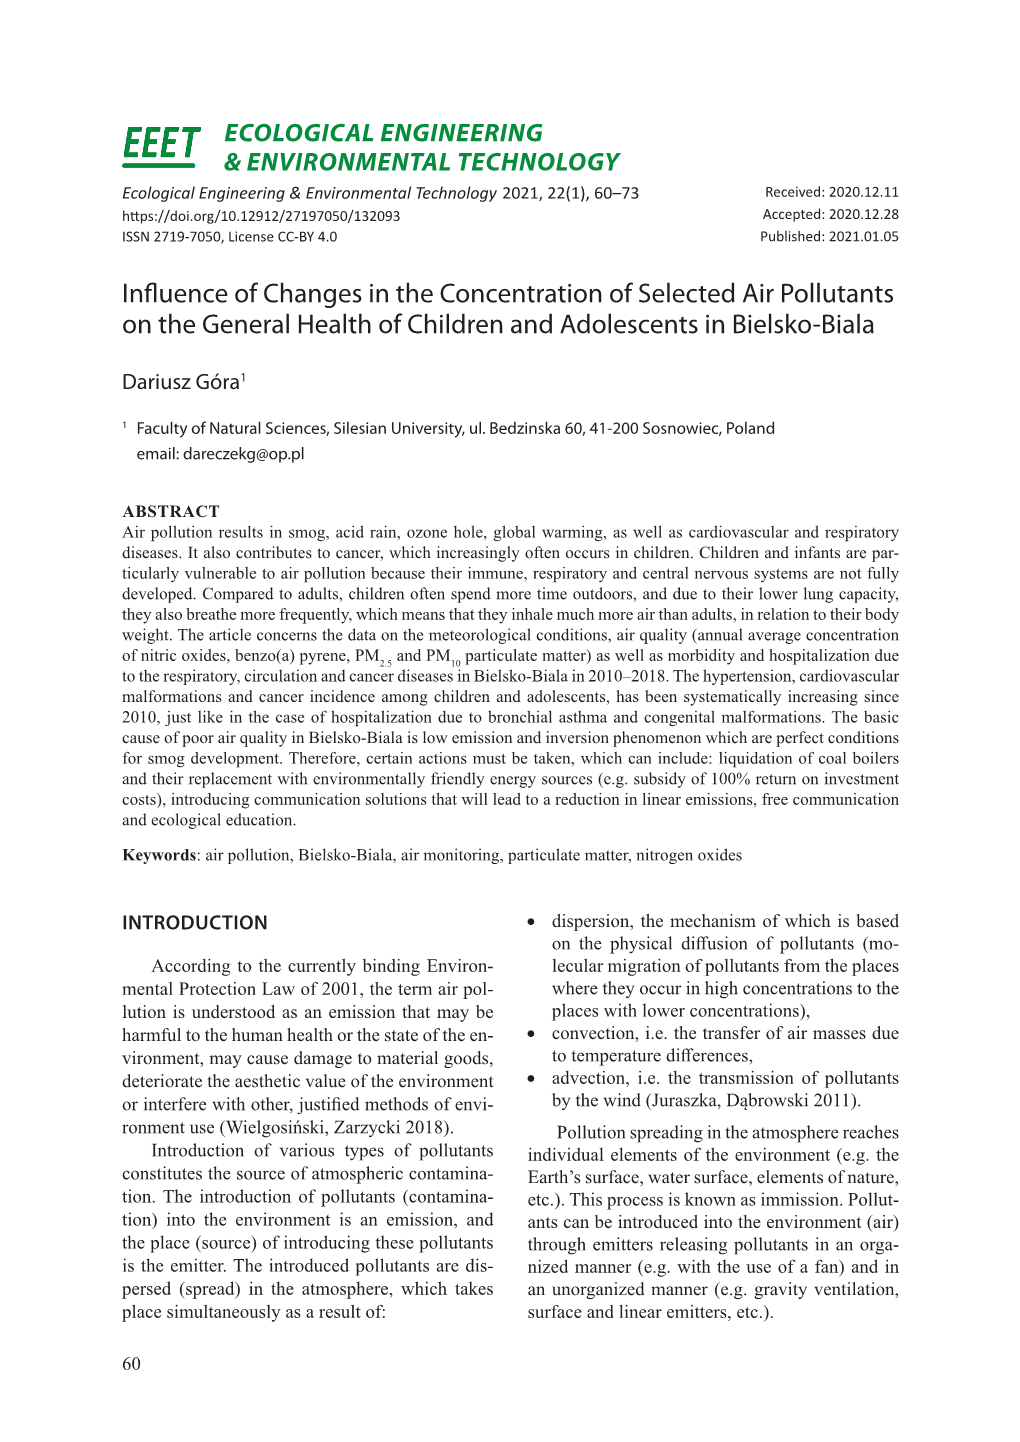 Influence of Changes in the Concentration of Selected Air Pollutants on the General Health of Children and Adolescents in Bielsko-Biala